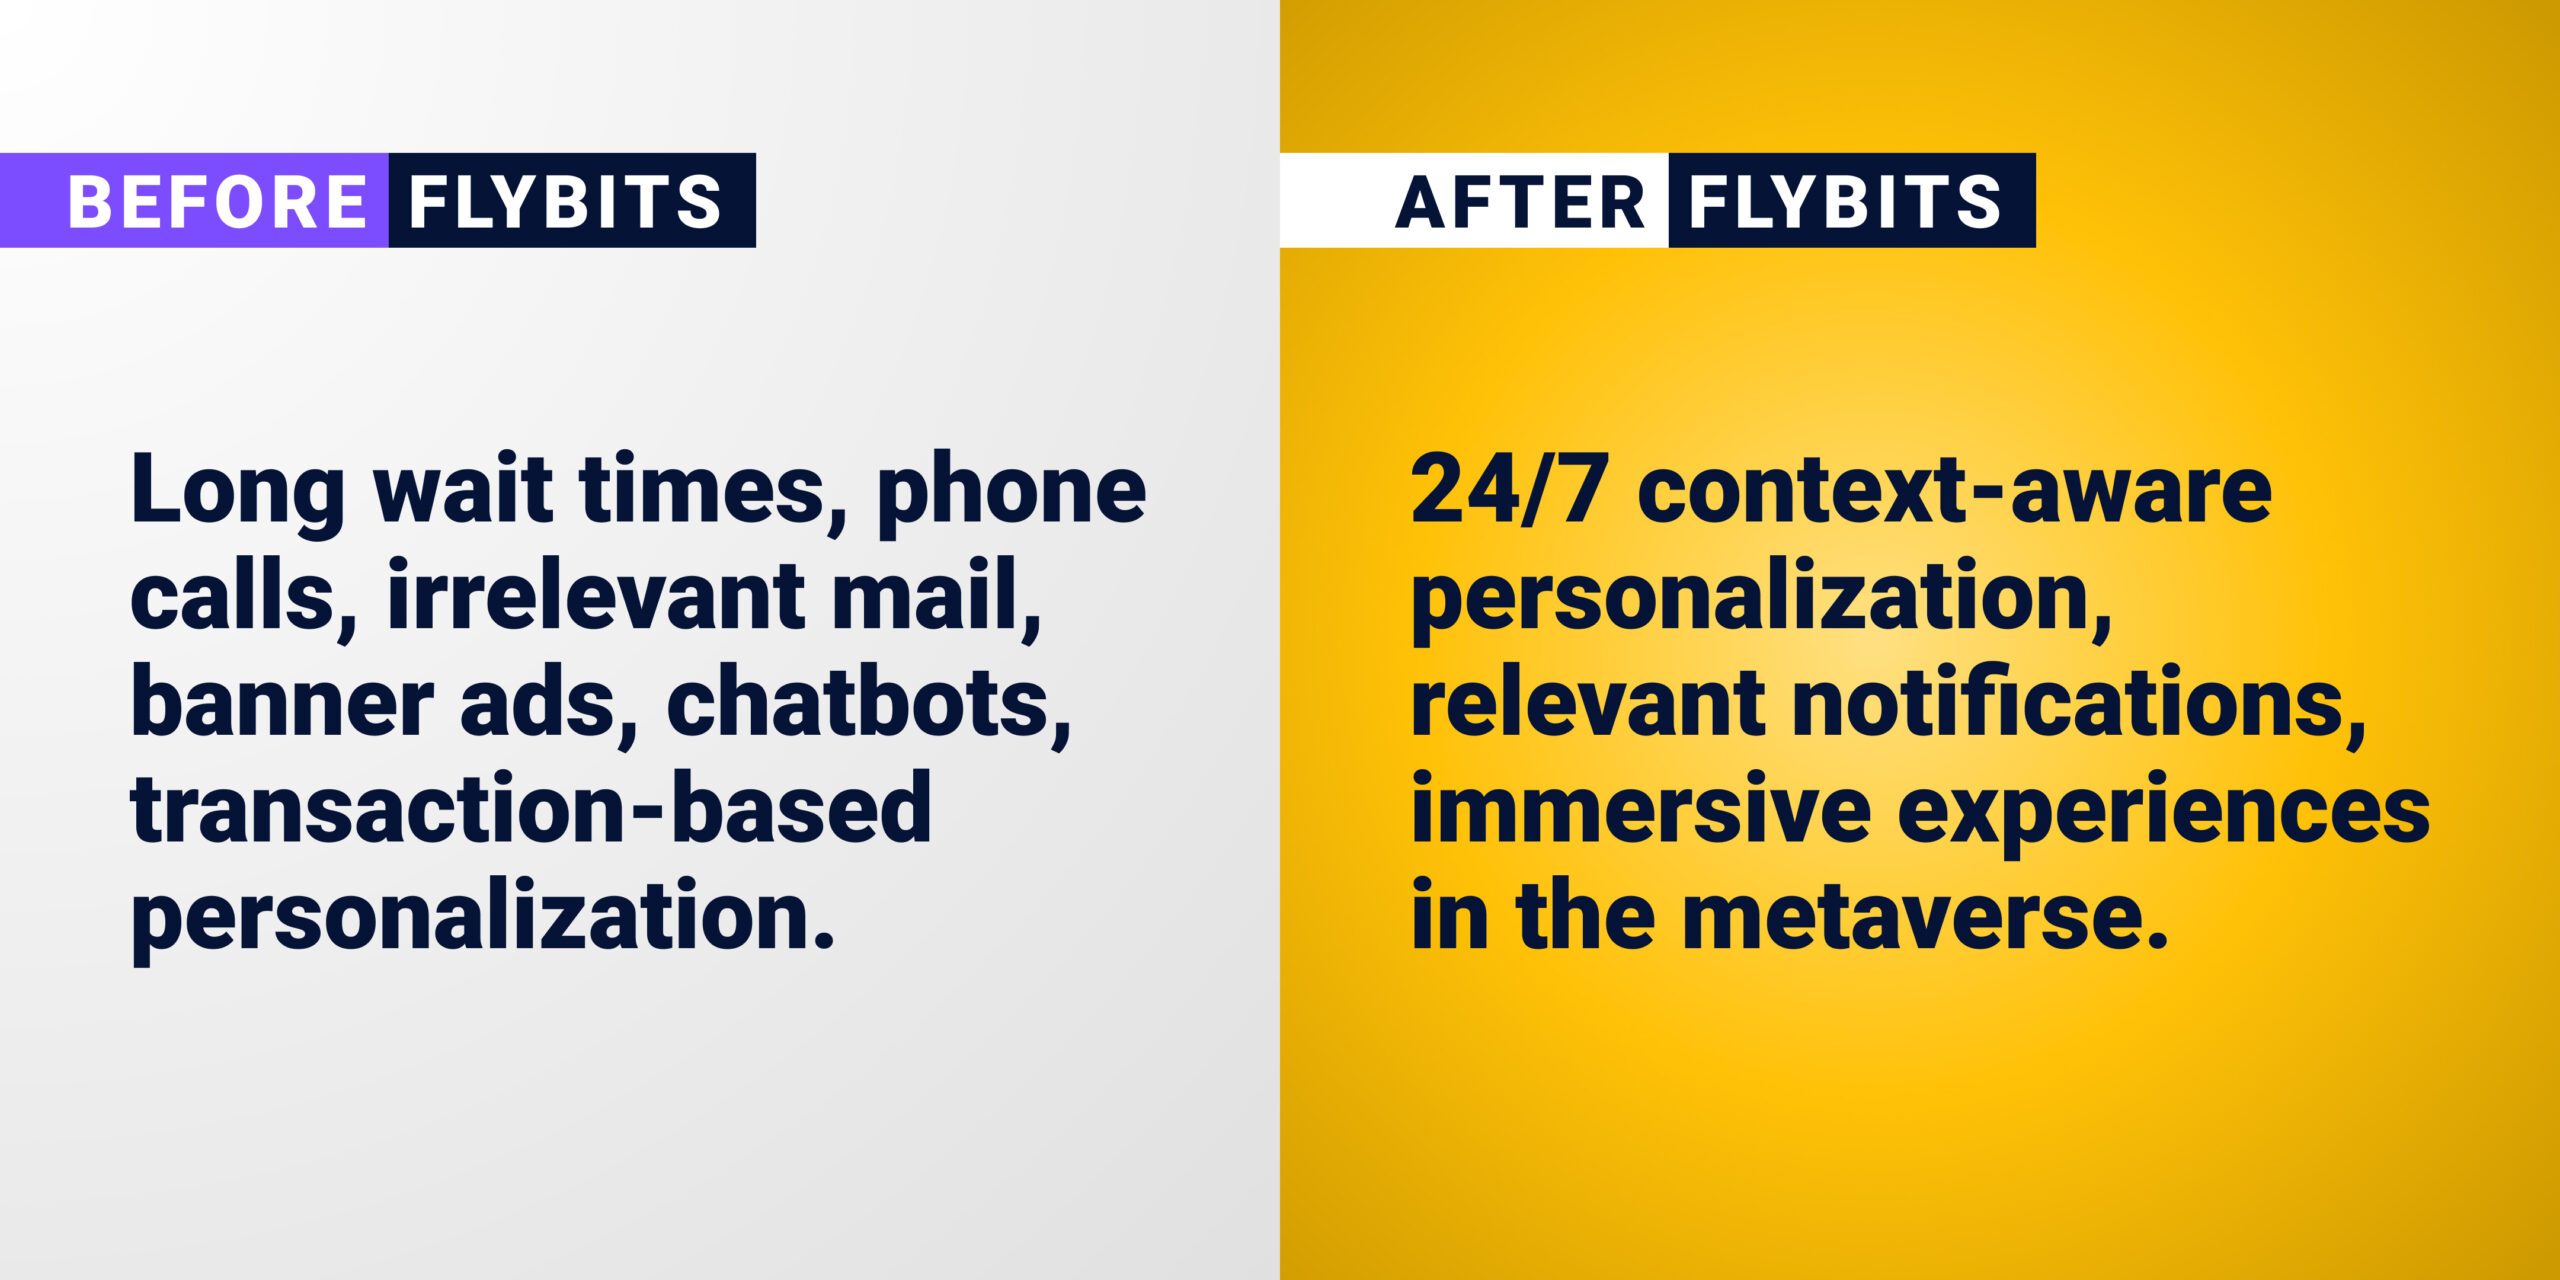 Before Flybits: Long wait times, phone calls, irrelevant mail, banner ads, chatbots, transaction-based personalization. After Flybits: 24/7 context-aware personalization, relevant notifications, immersive experiences in the metaverse.